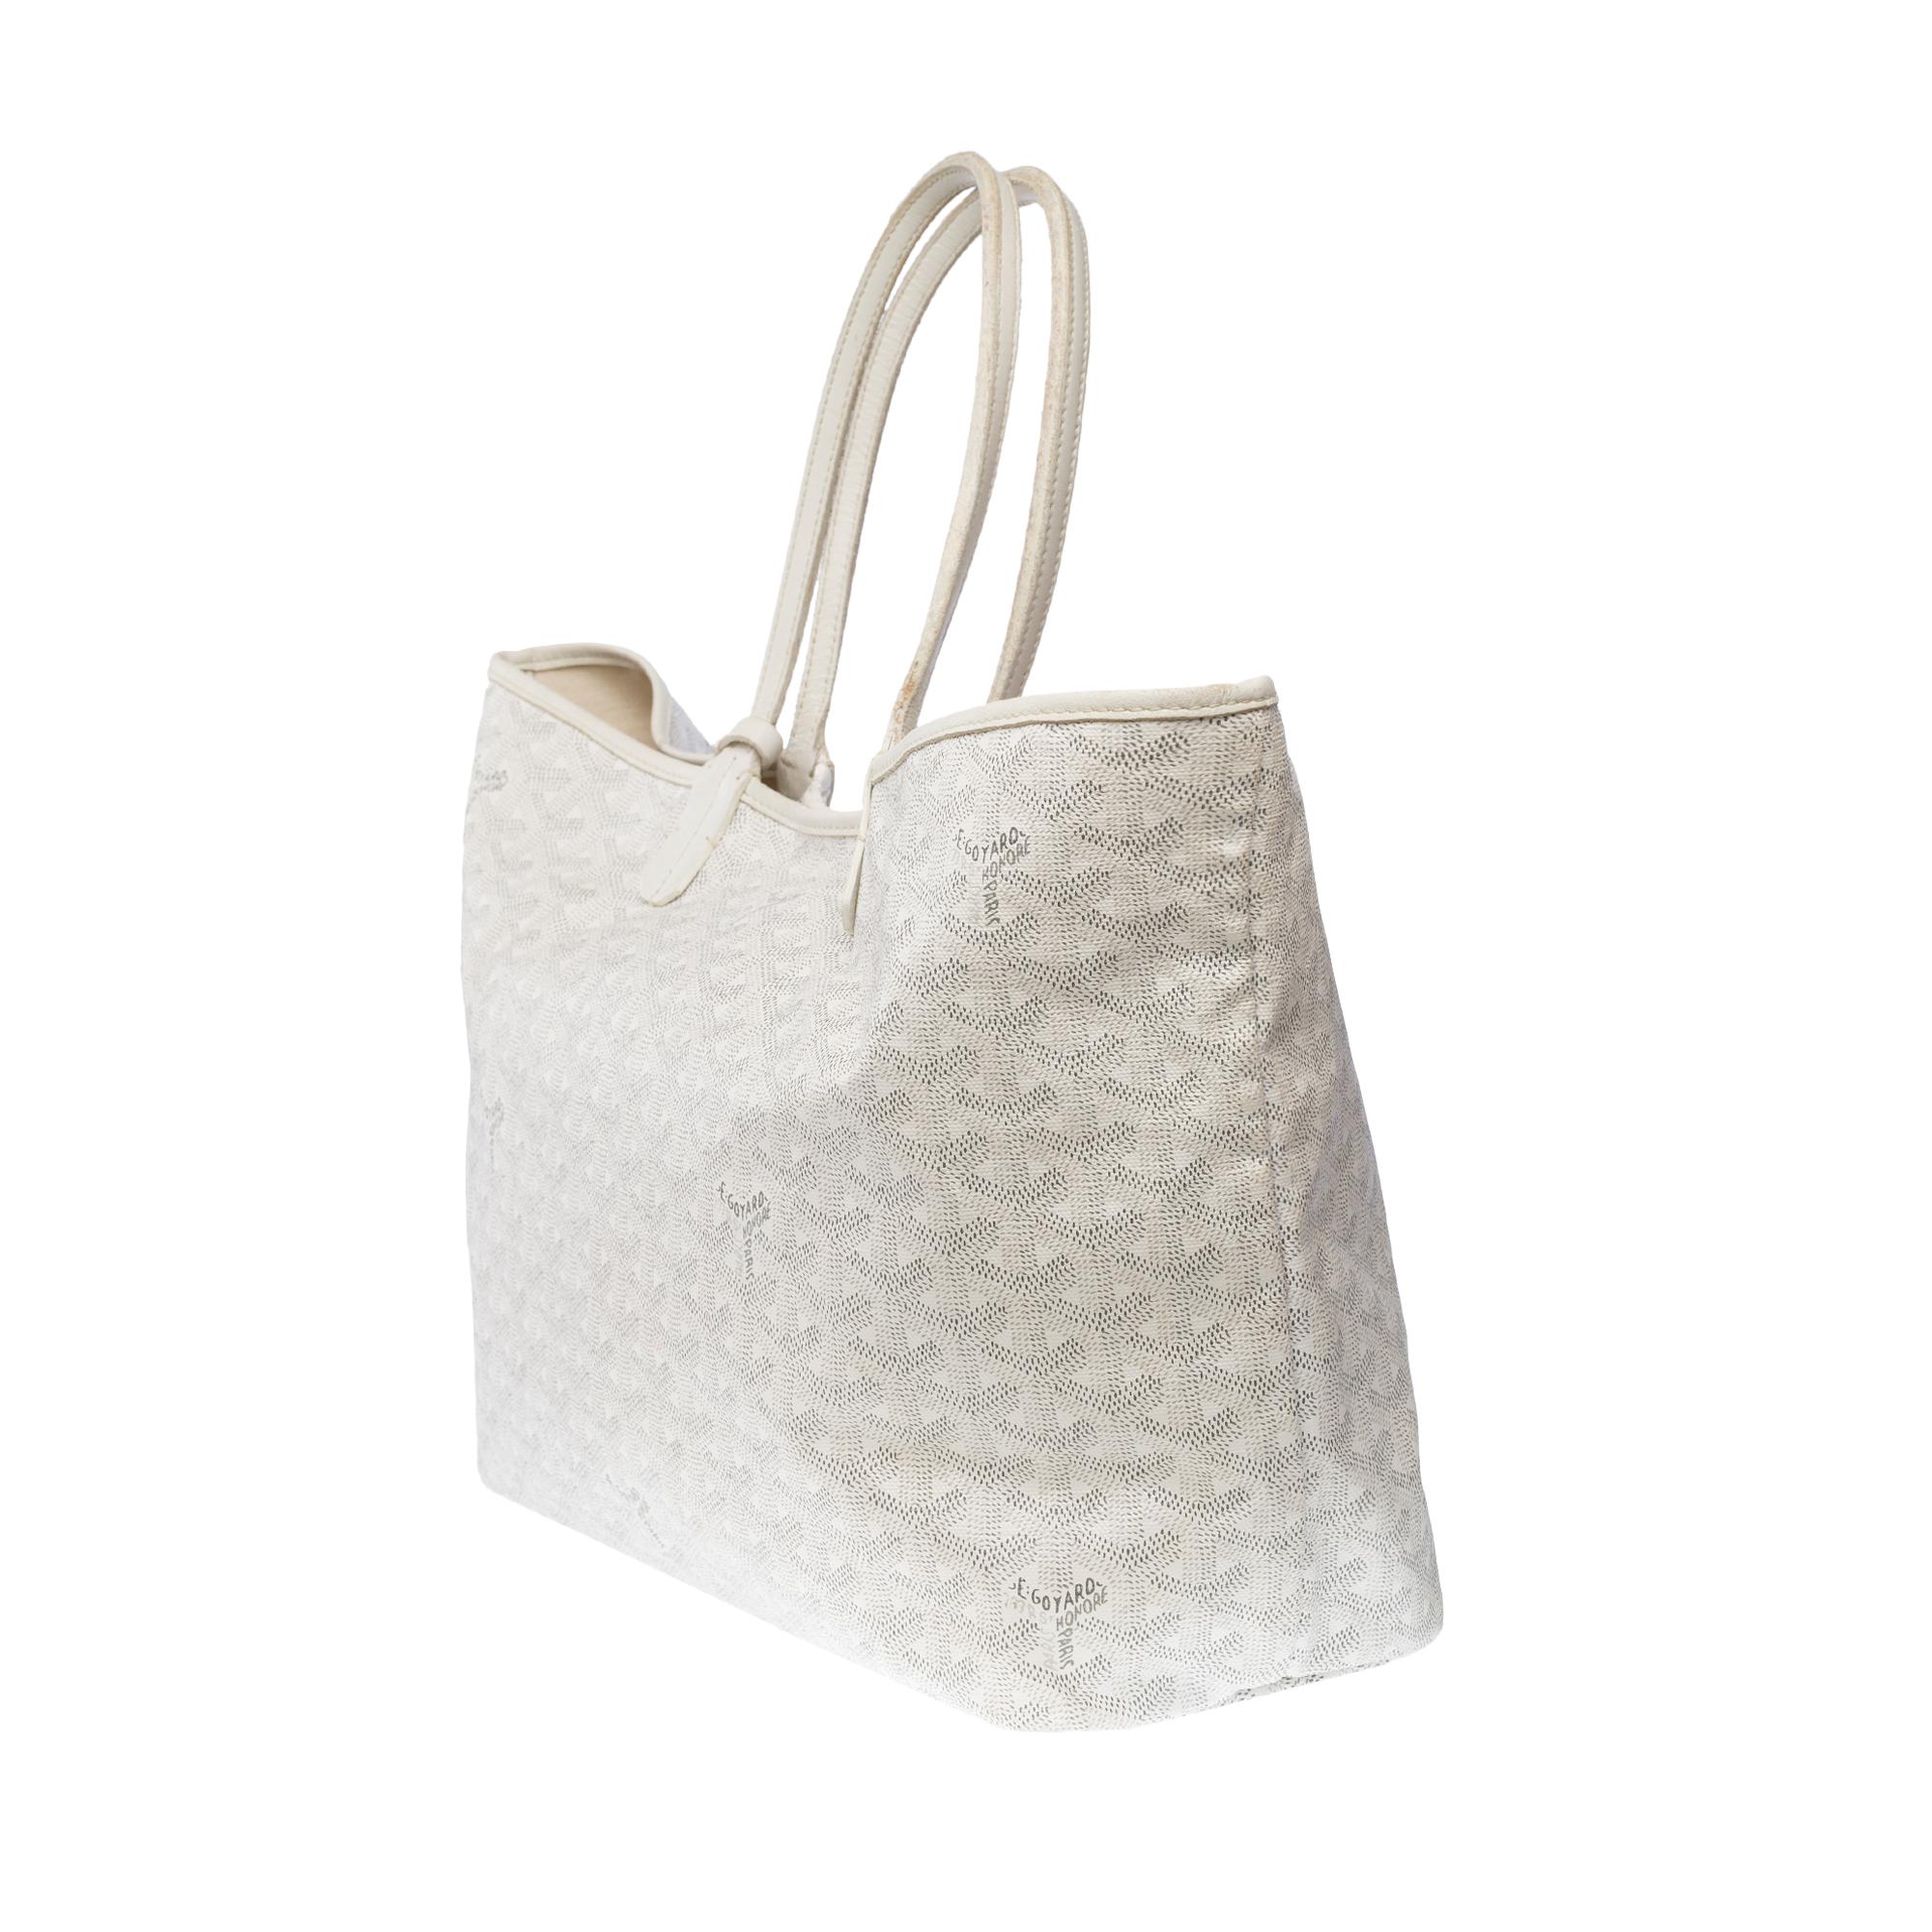 The Coveted Goyard Saint-Louis PM Tote bag in White canvas and leather, SHW 1